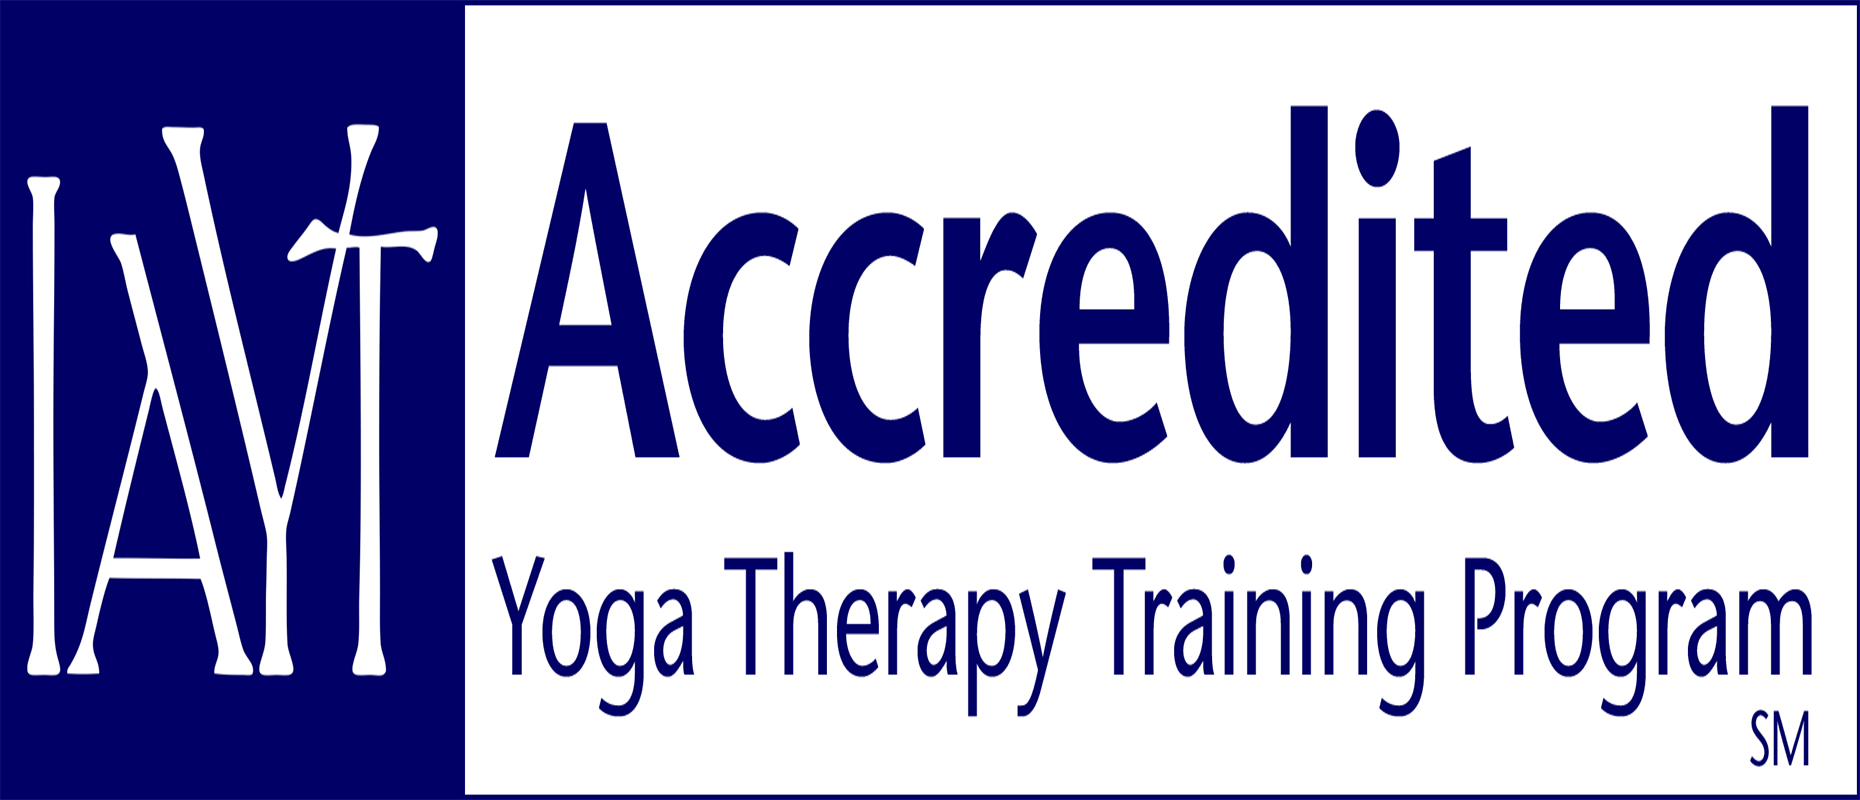 Yoga Therapy Training Course (YTTC) – 1000 Hours